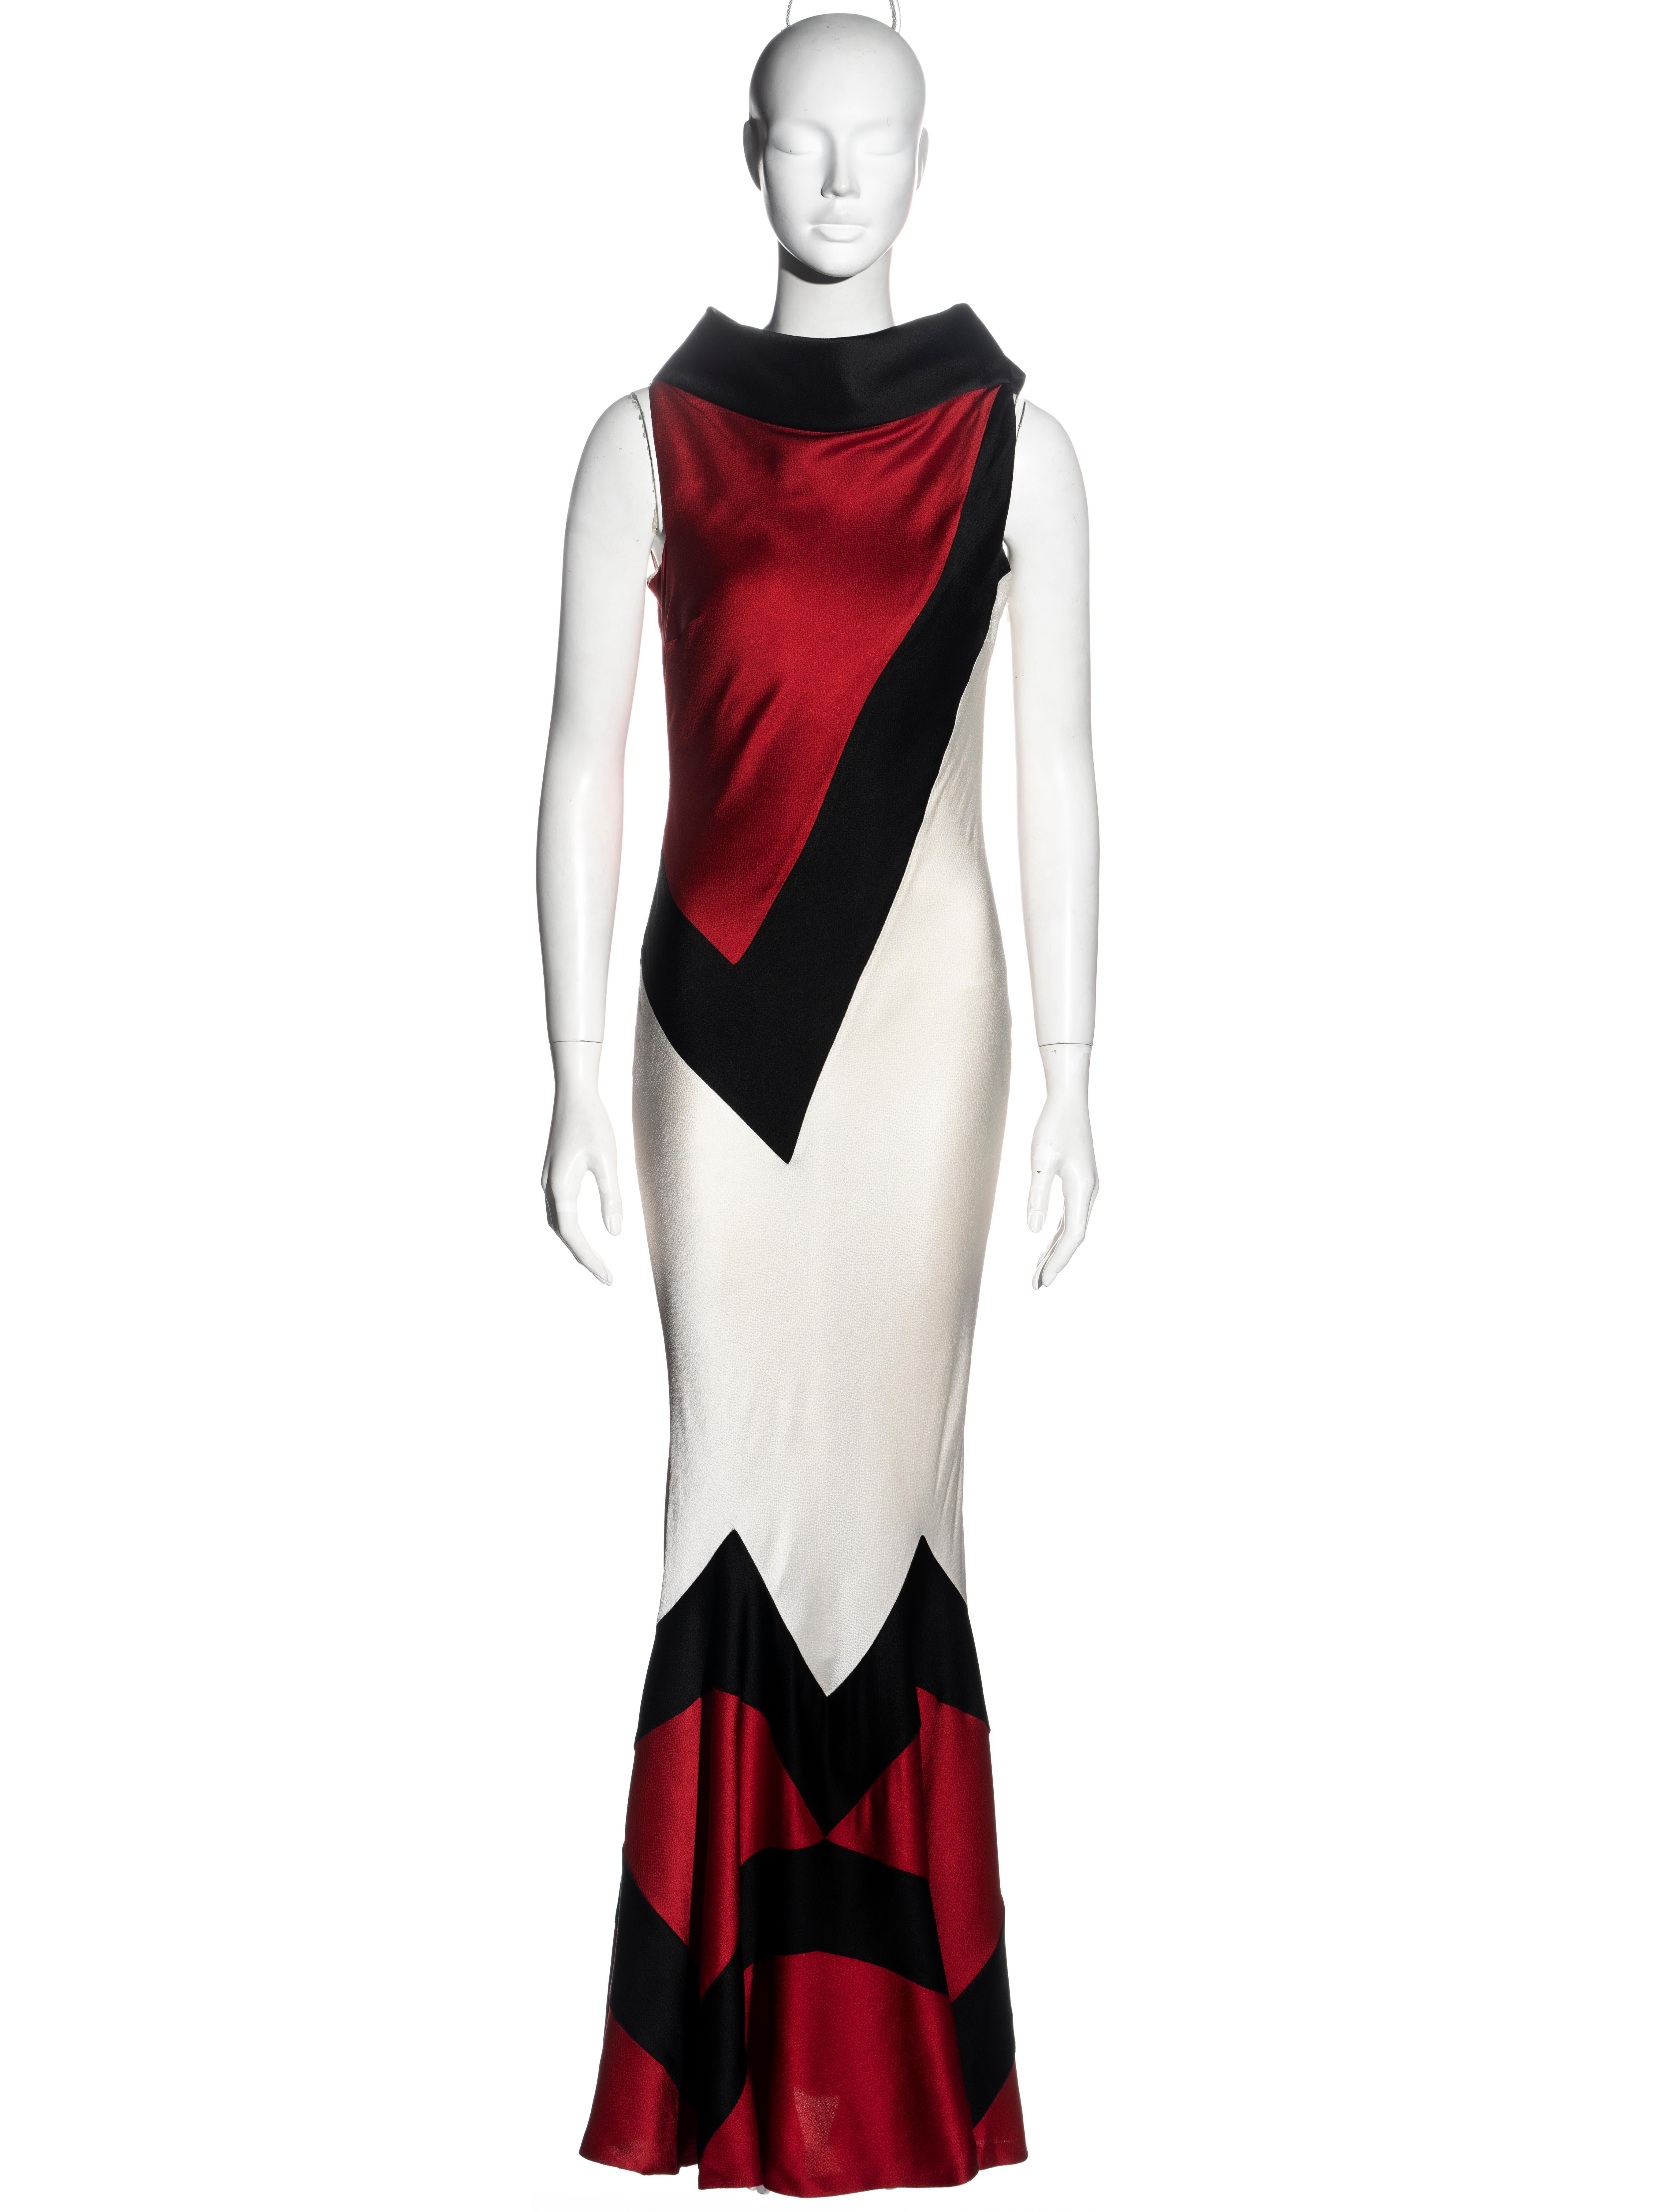 ▪ Christian Dior tricolour evening dress
▪ Designed by John Galliano
▪ Made up of red, black and ivory viscose panels 
▪ Standing collar 
▪ Floor-length fishtail skirt
▪ Silk lining 
▪ FR 38 - UK 10 - US 6
▪ Spring-Summer 1999
▪ 56% Viscose, 44%